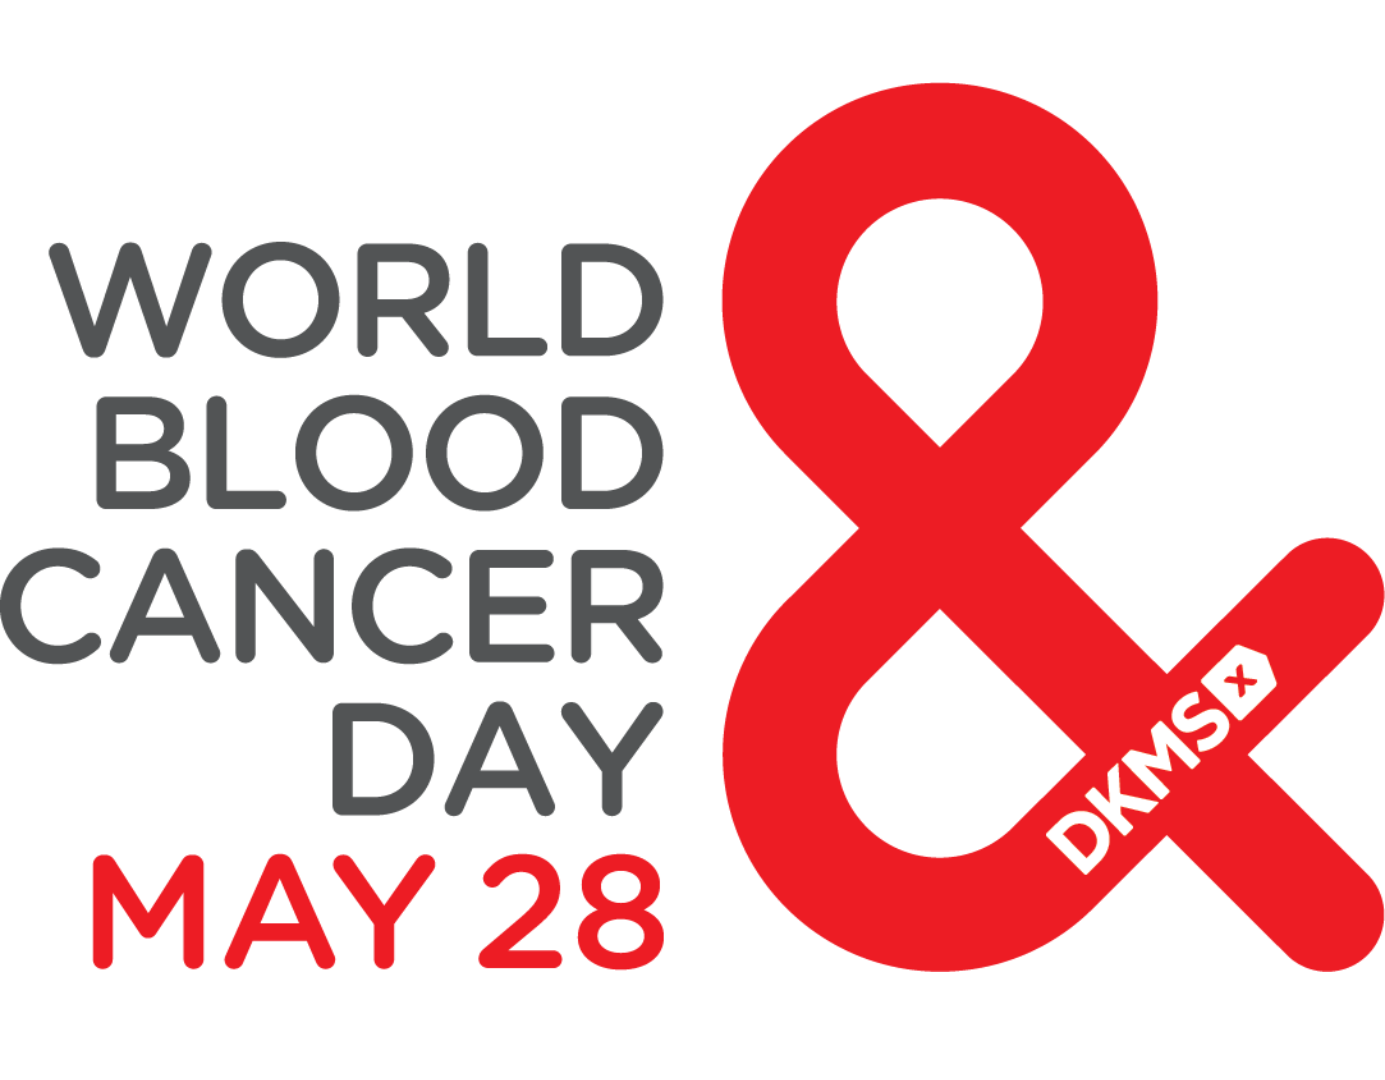 Image reads: World Blood Cancer Day May 28. 